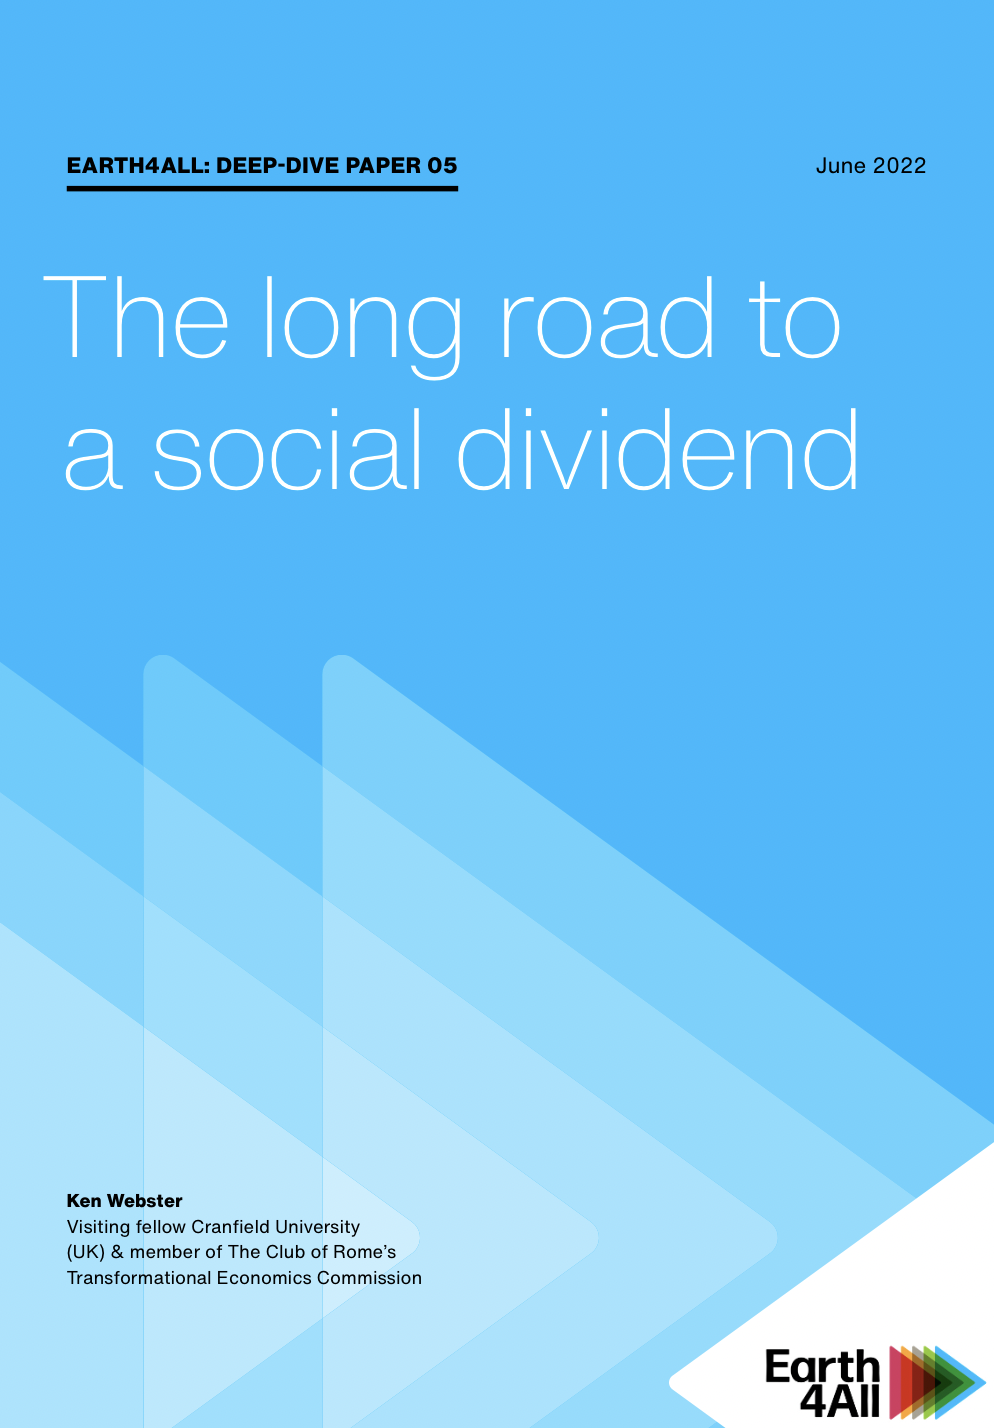 The long road to a social dividend